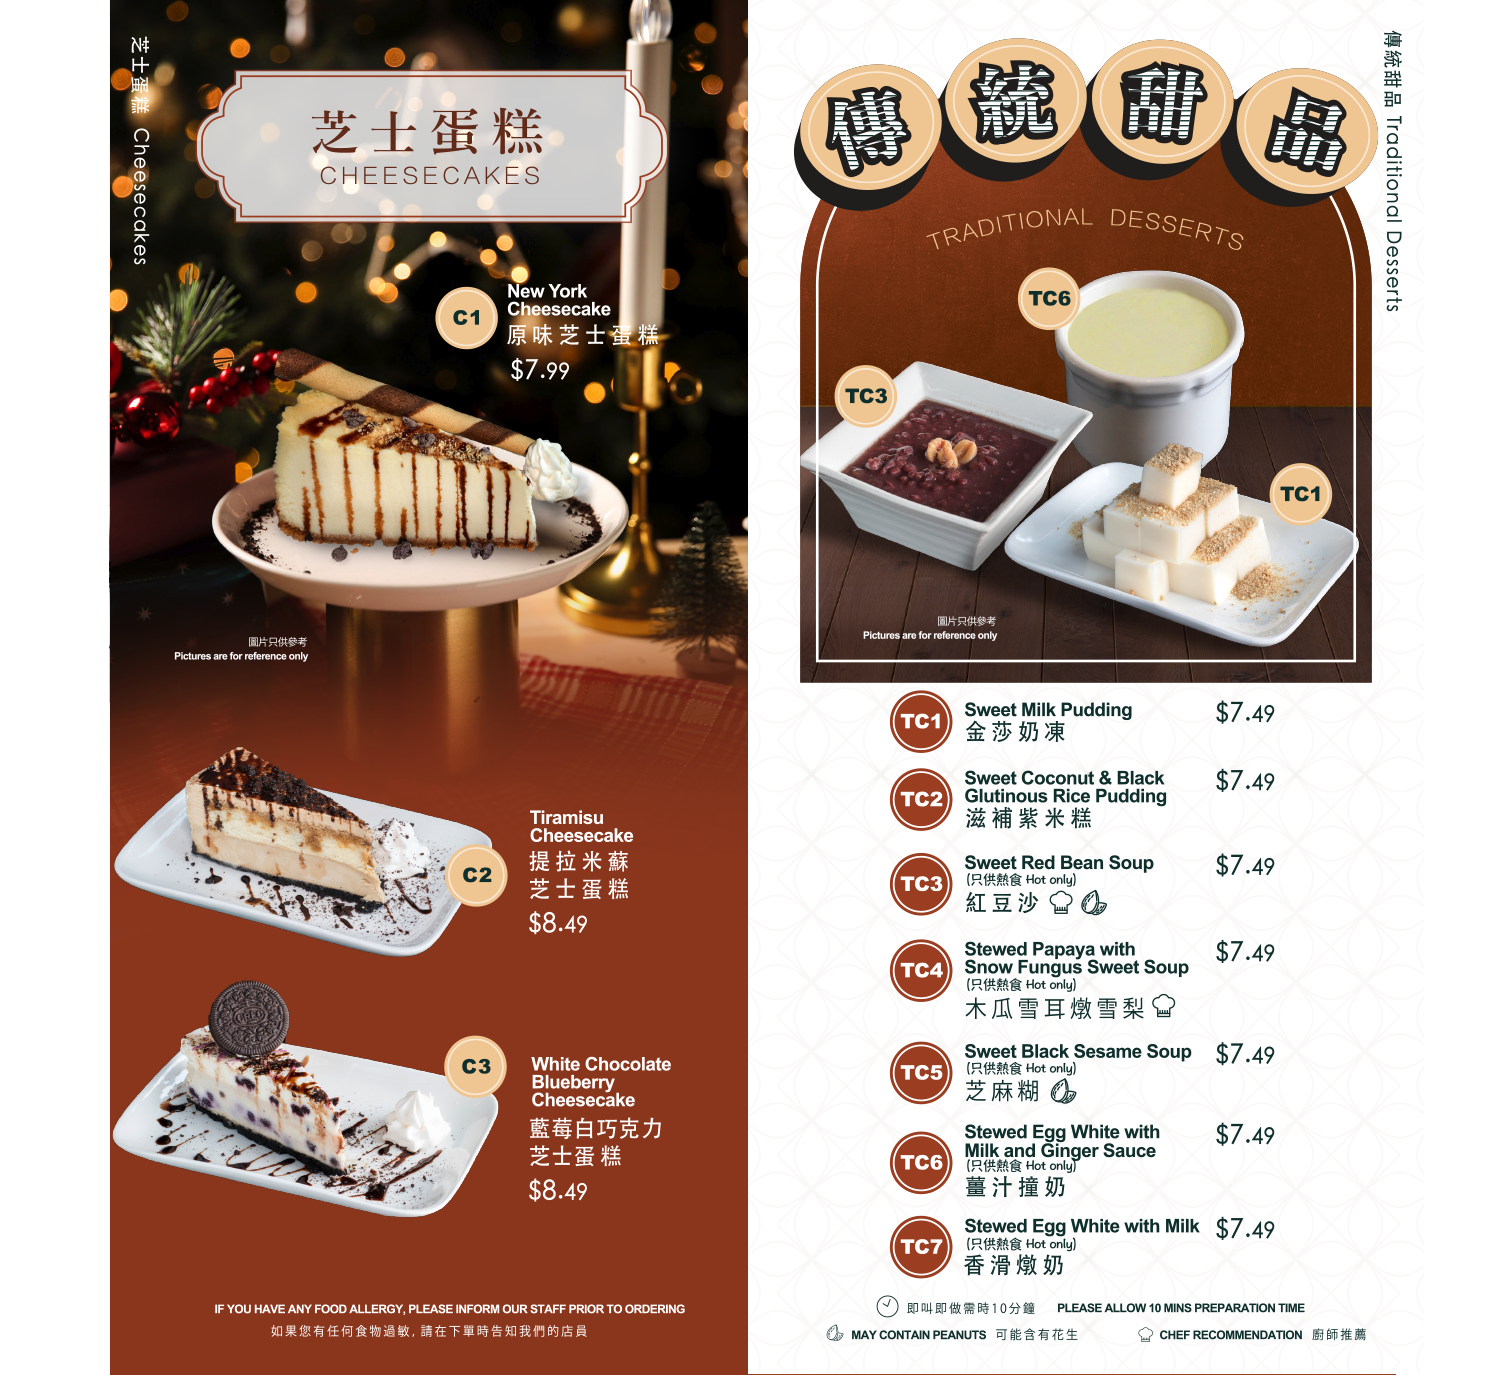 Menu Cheese Cake and Traditional Desserts